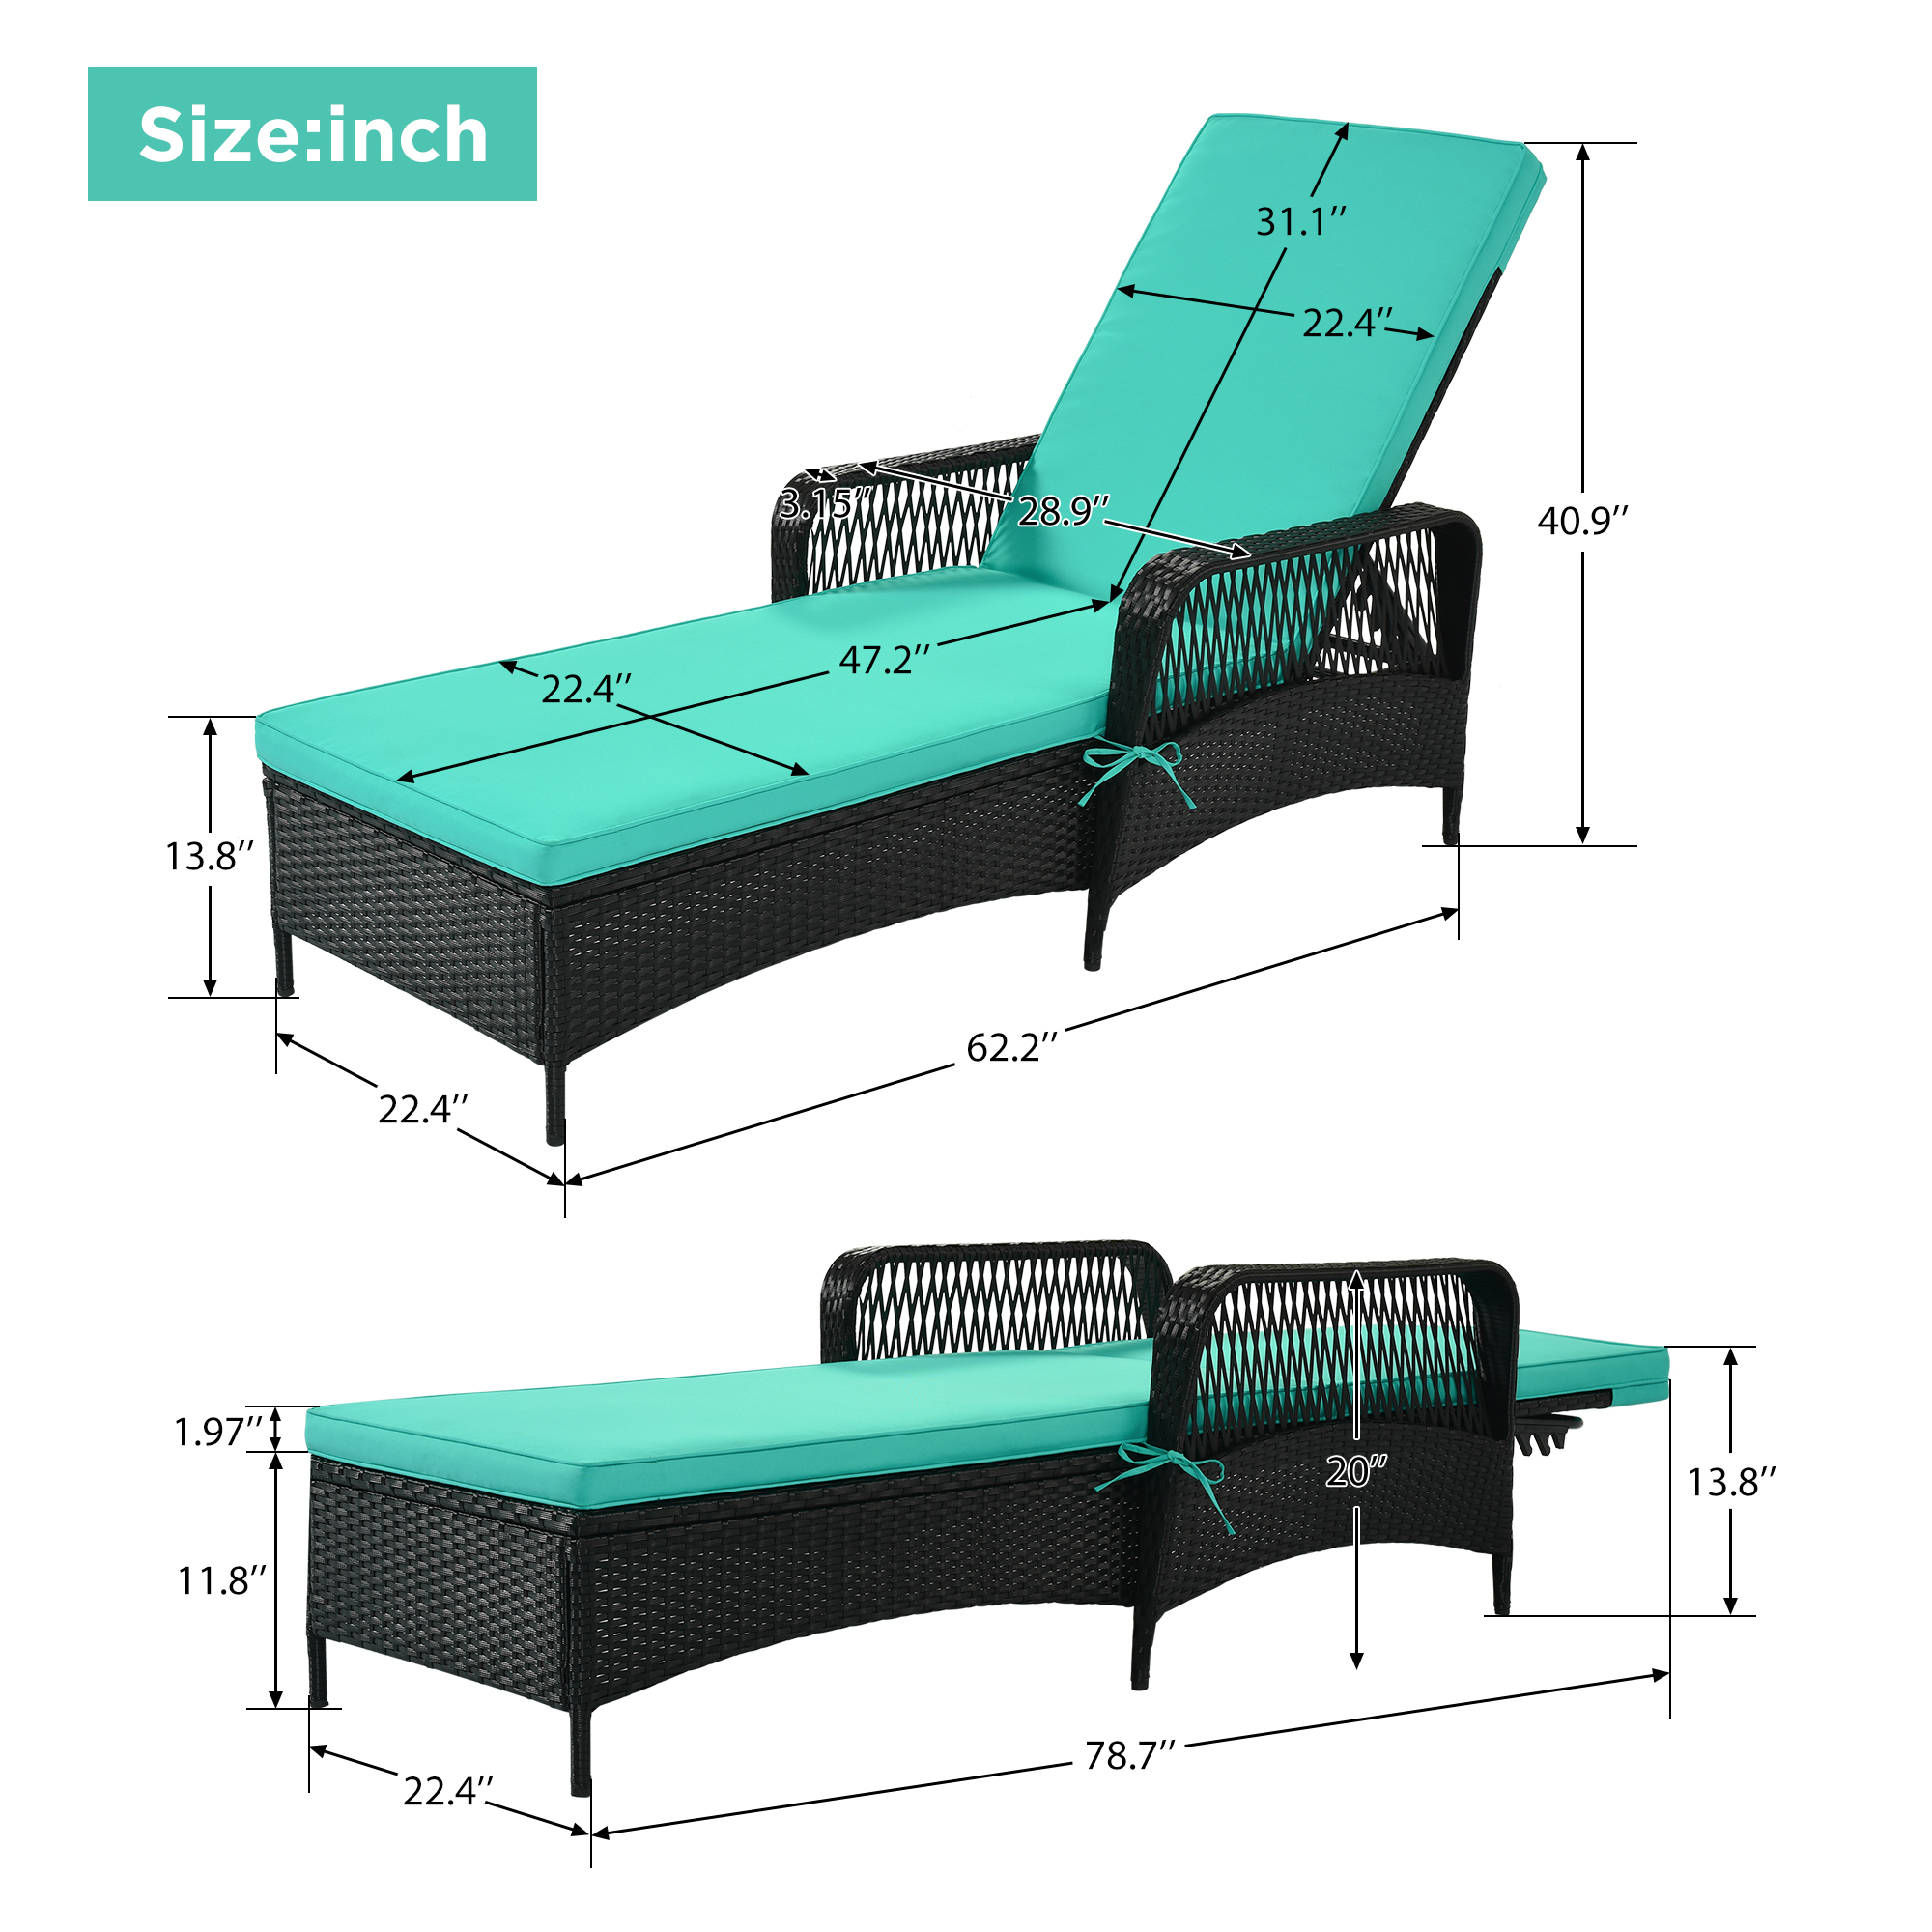 Patio Lounge Chairs Set of 2, Outdoor Chaise Lounges Chairs with 6 Backrest Angles, and Removable Cushions, PE Rattan Backrest Lounger Chairs Set for Pool Porch Backyard Patio, K2693 - image 4 of 10